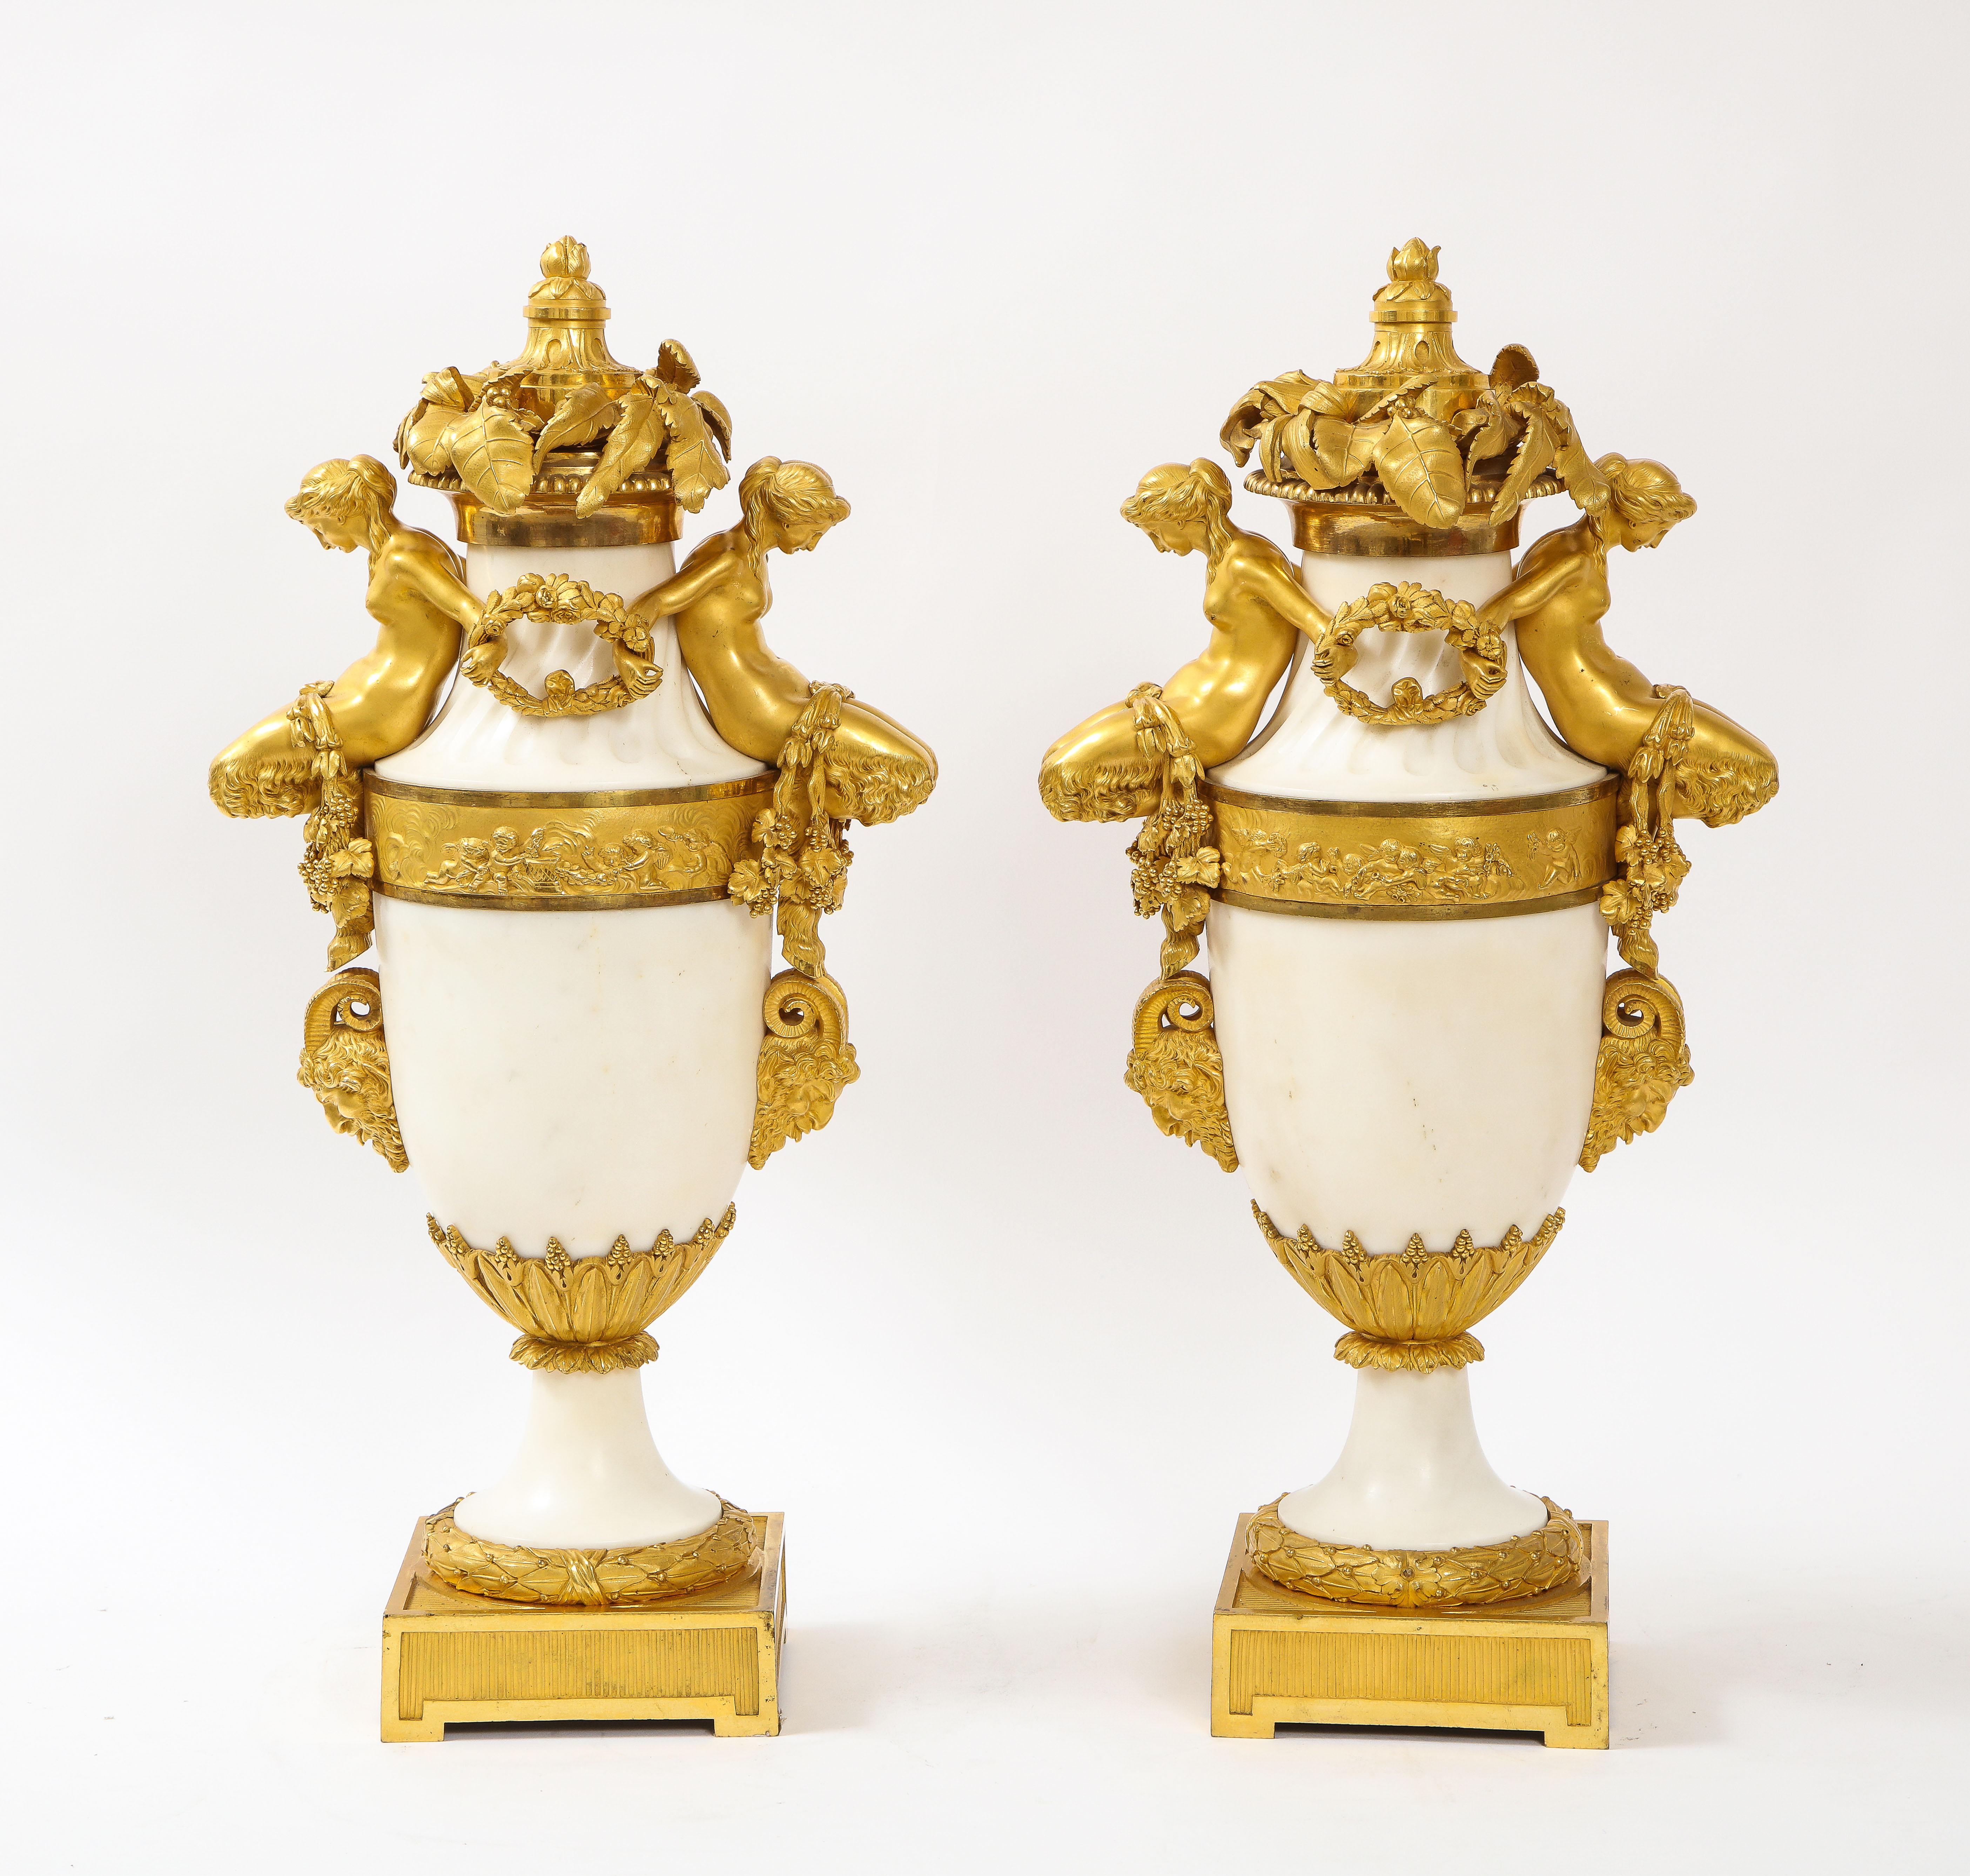 A Marvelous Pair of 19th Century Louis XVI Style French Dore Bronze Mounted White Carrara Marble Covered Urns/Covered vases, attributed to Henry Dasson. Each vase is beautifully hand-made with hand-carved Carrara marble bodies with fluted marble